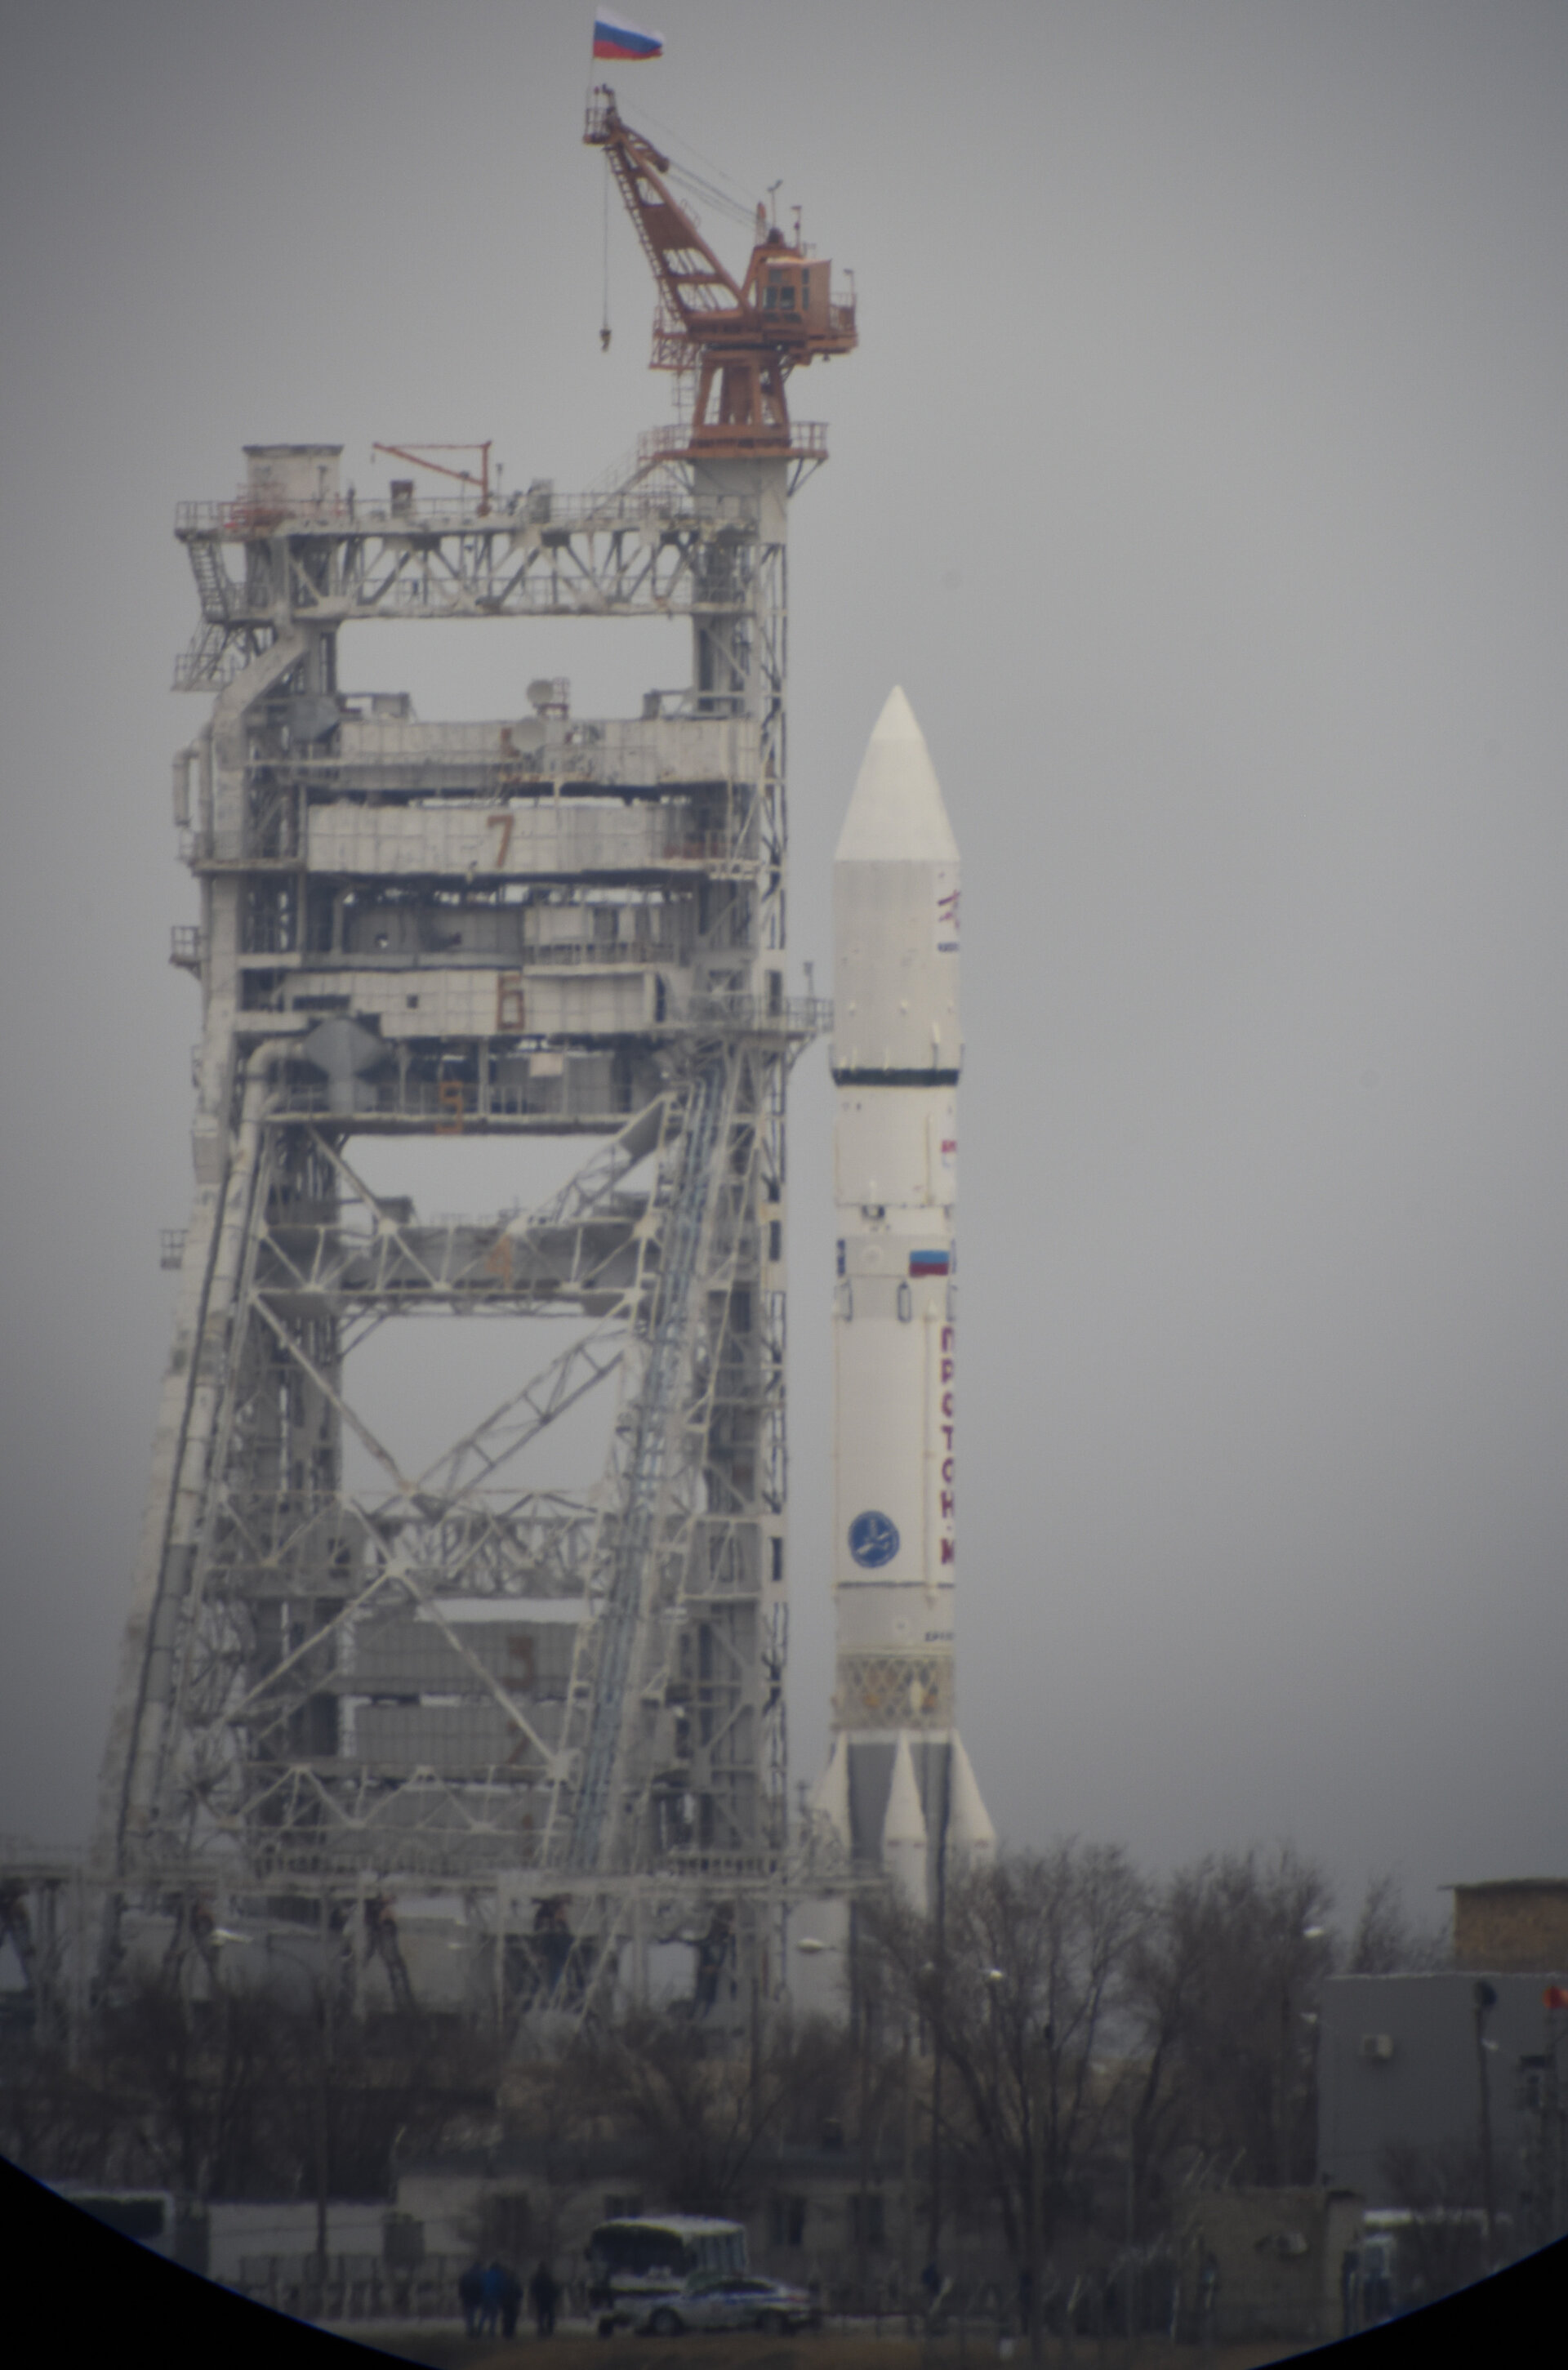 Service gantry tower has started to roll back away from the rocket